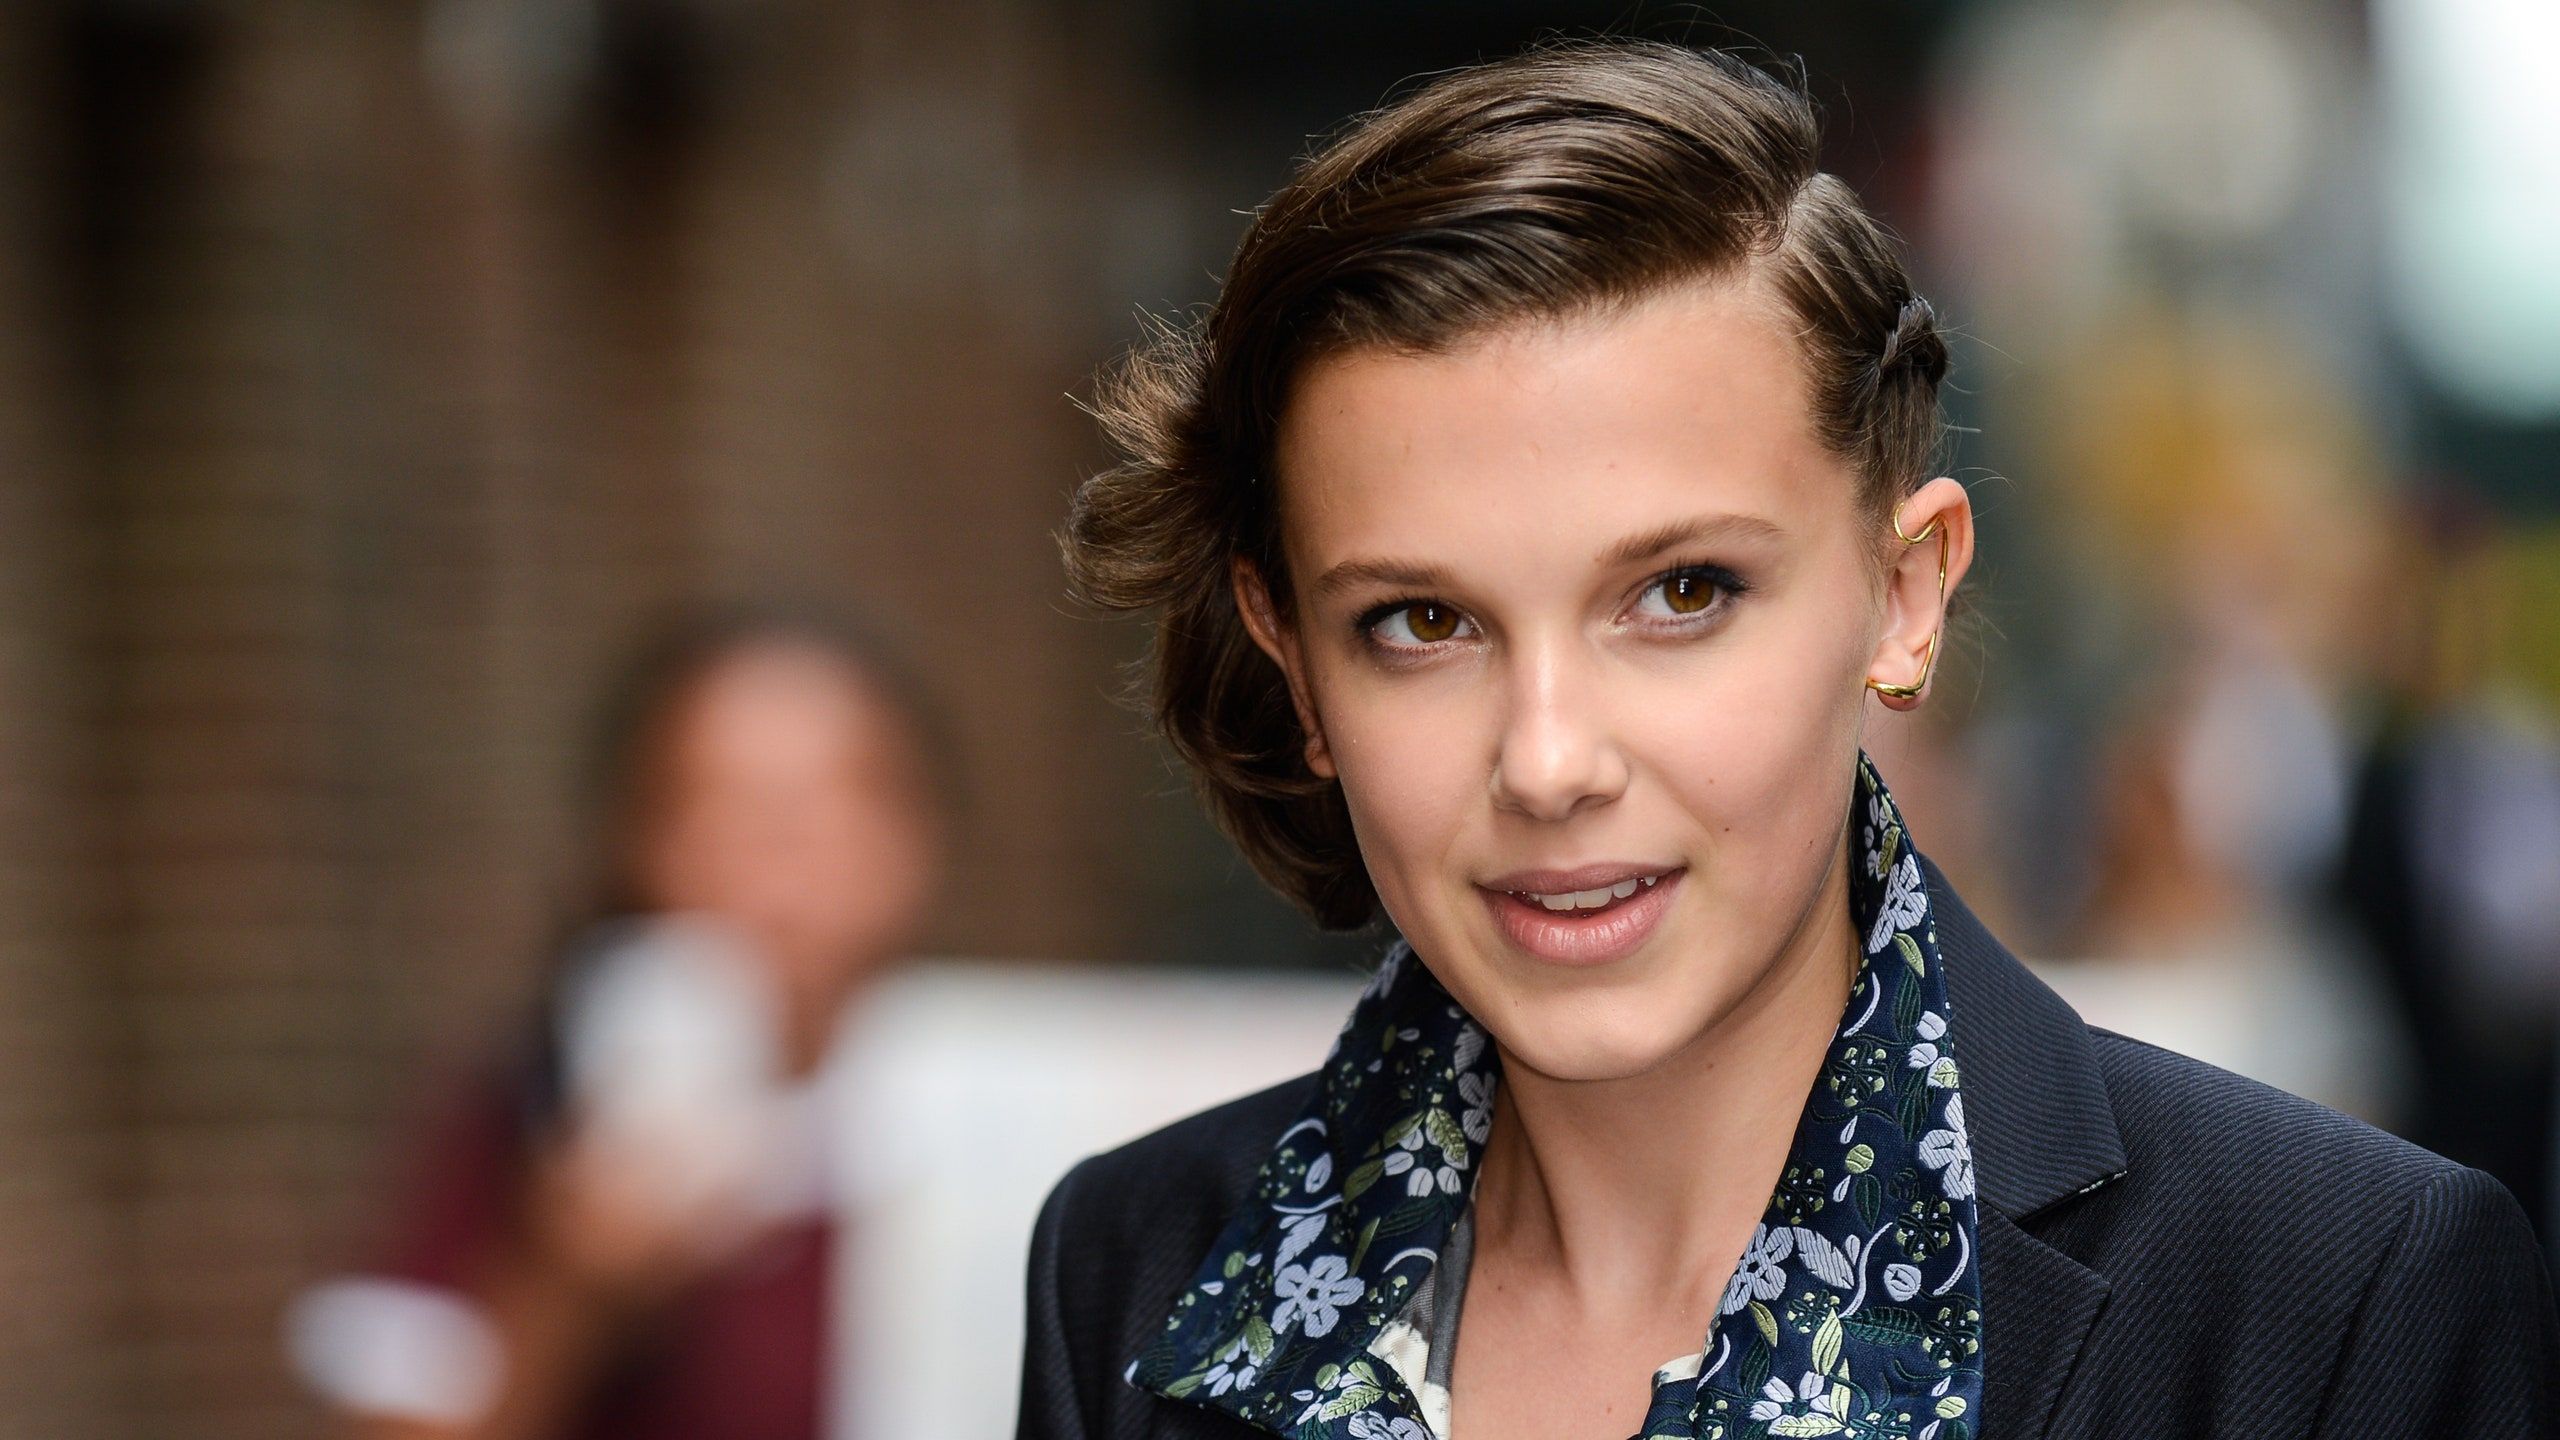 The '80s Movie That Inspired Millie Bobby Brown's Eleven Will Make